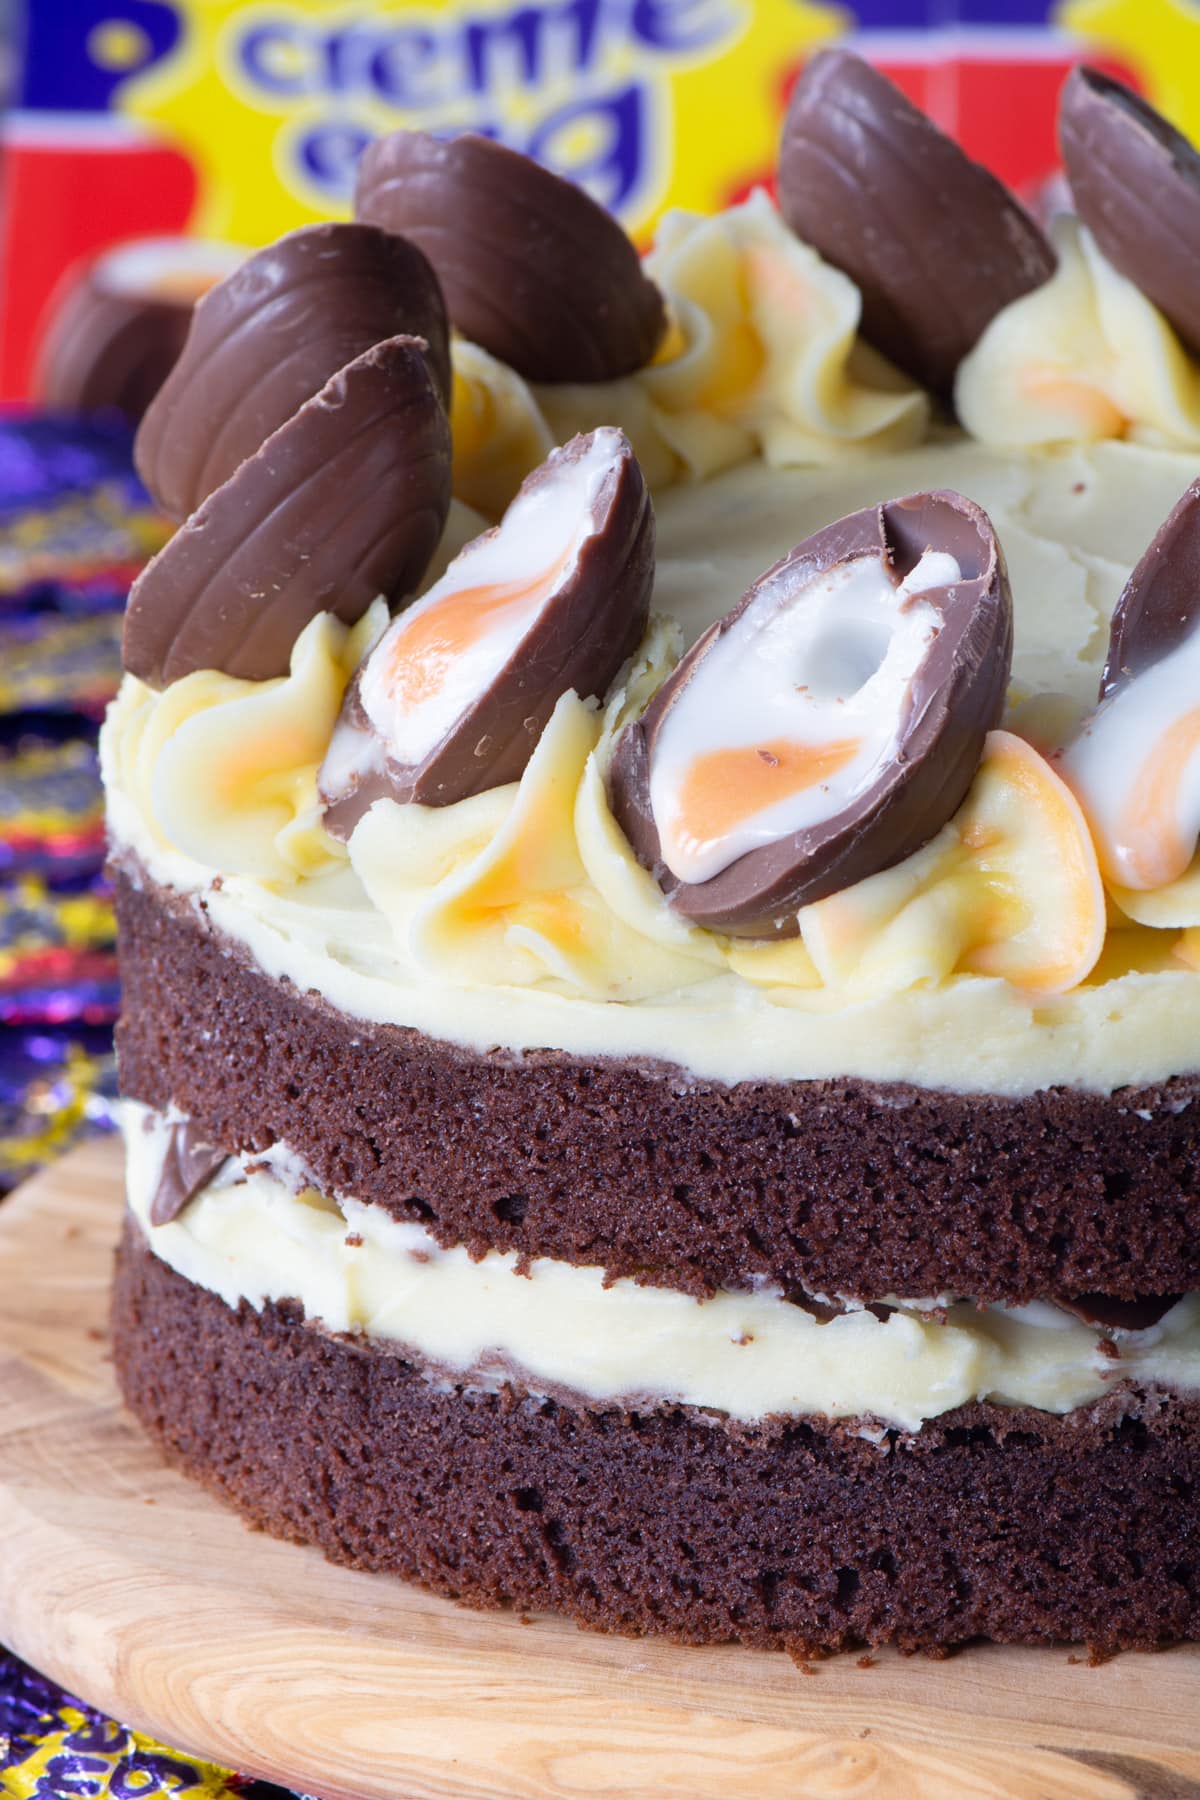 Creme Egg Cake. A chocolate sponge cake with white chocolate buttercream, topped with Creme Eggs.